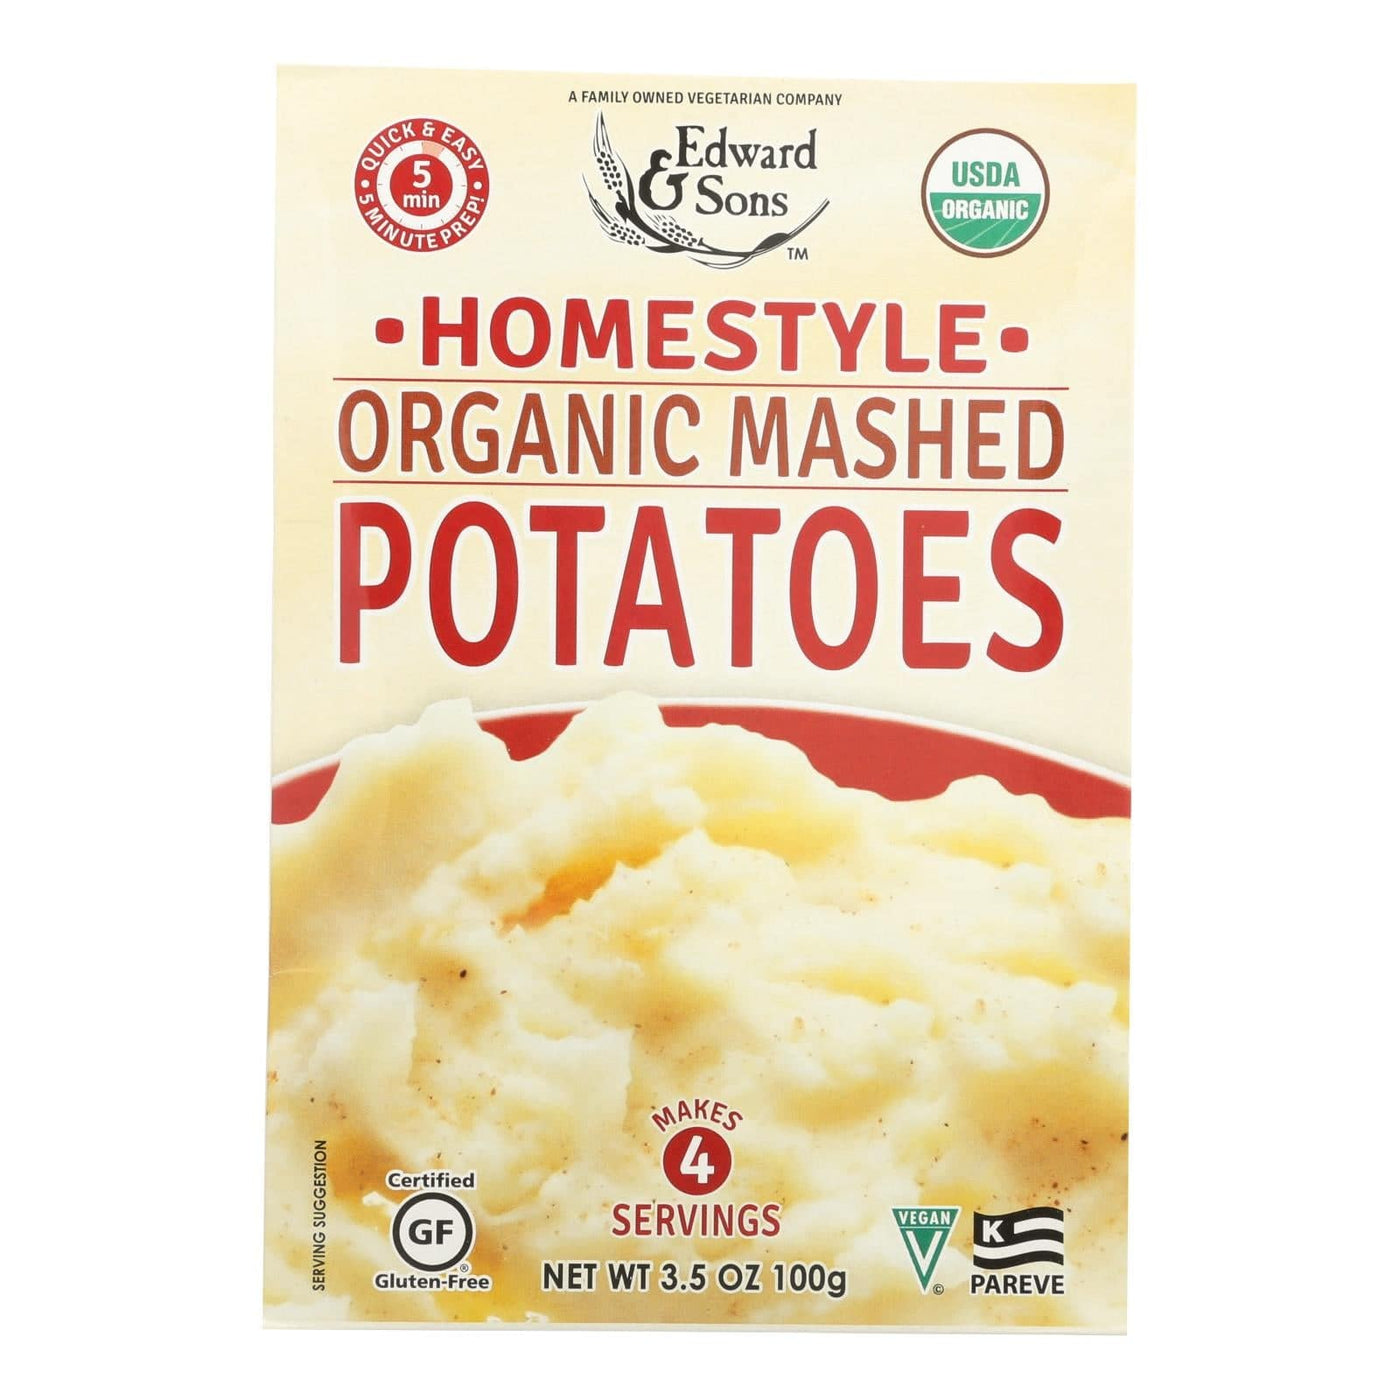 Edward And Sons Organic Mashed Potatoes - Home Style - Case Of 6 - 3.5 Oz. | OnlyNaturals.us